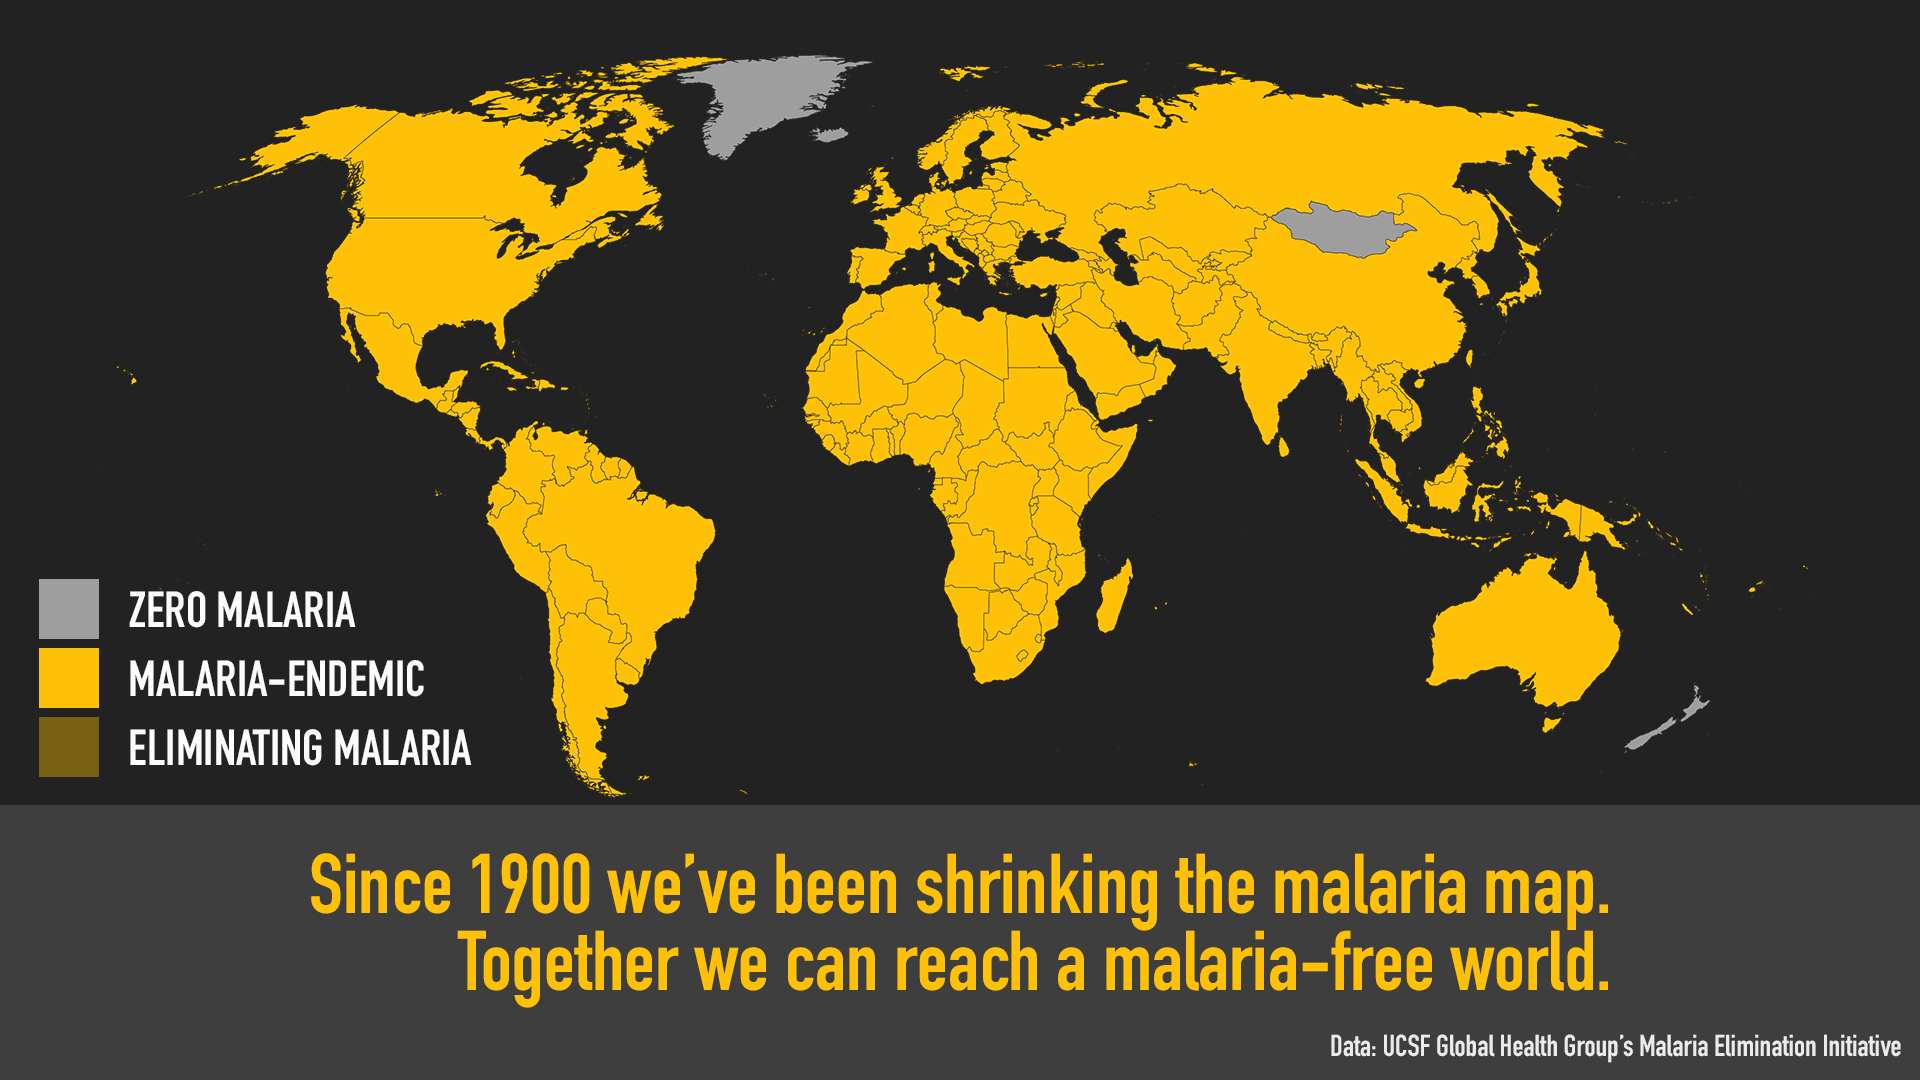 Gif of map of the world showing malaria prevalence decreasing over time